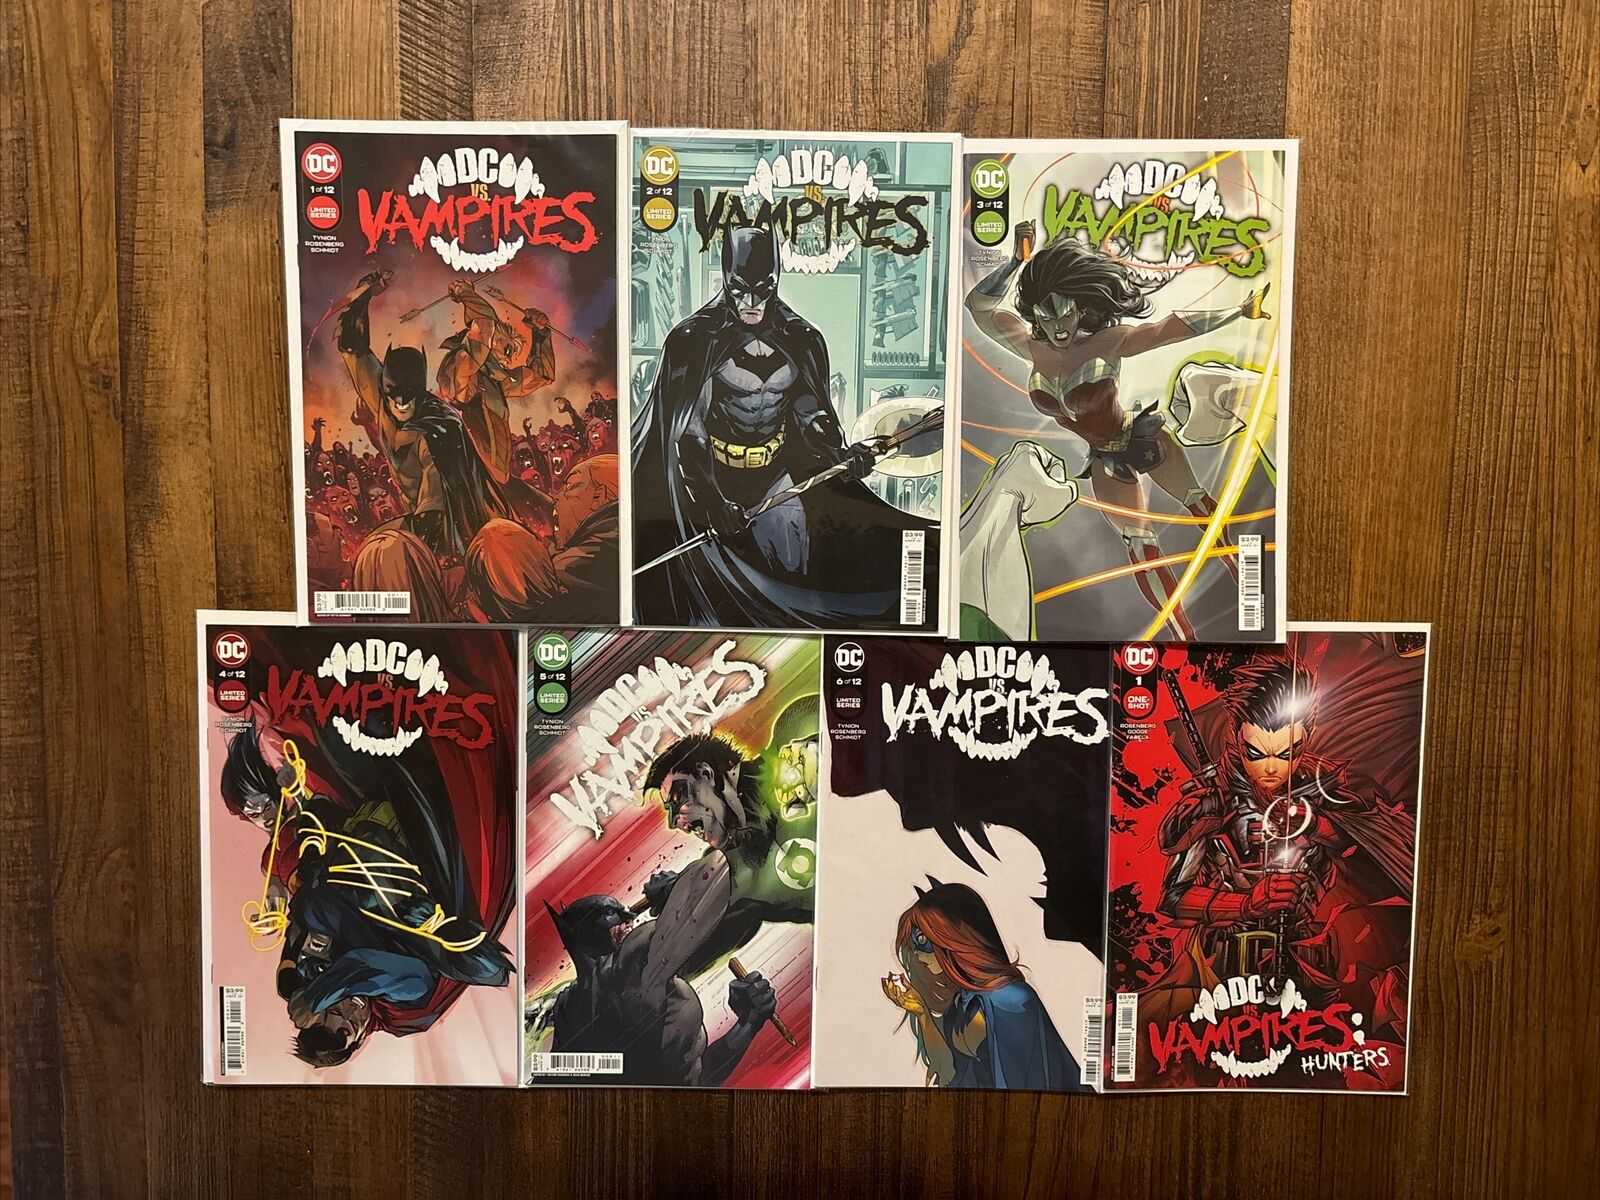 DC vs Vampires 1-12 Complete Run + Hunters One-shot & Killers One-shot-14 Issues